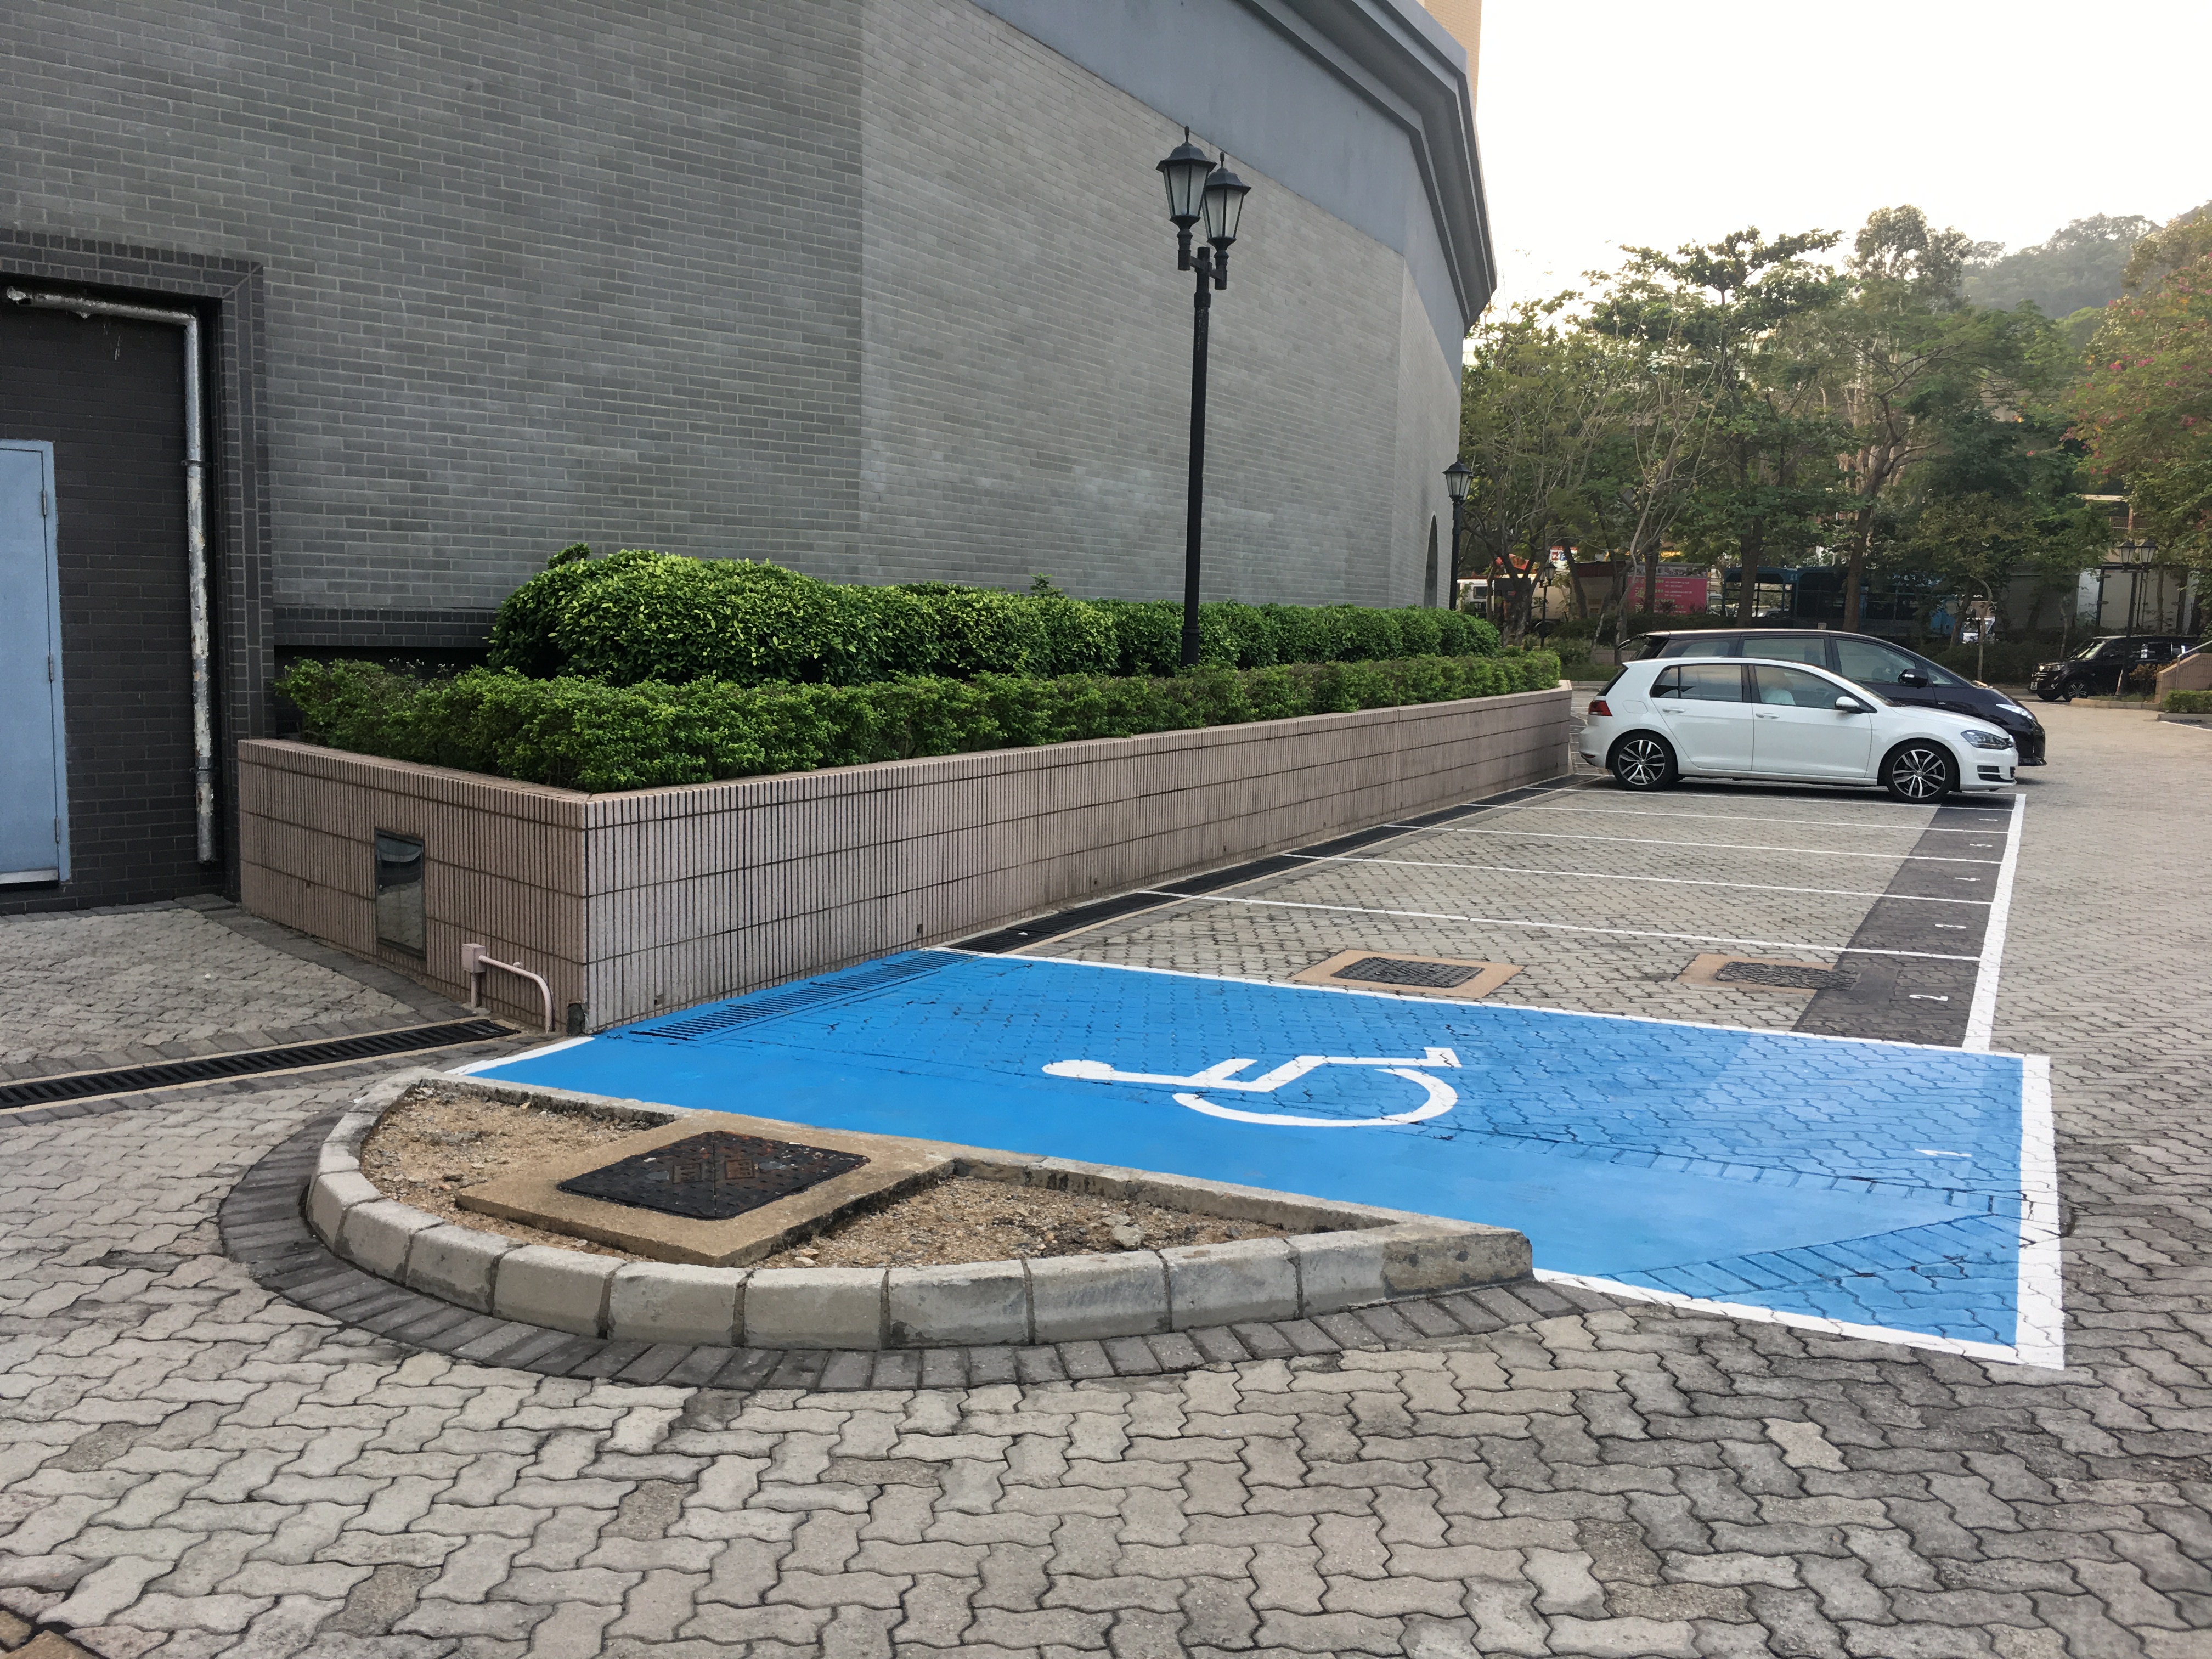 Designated car parking space for persons with disabilities